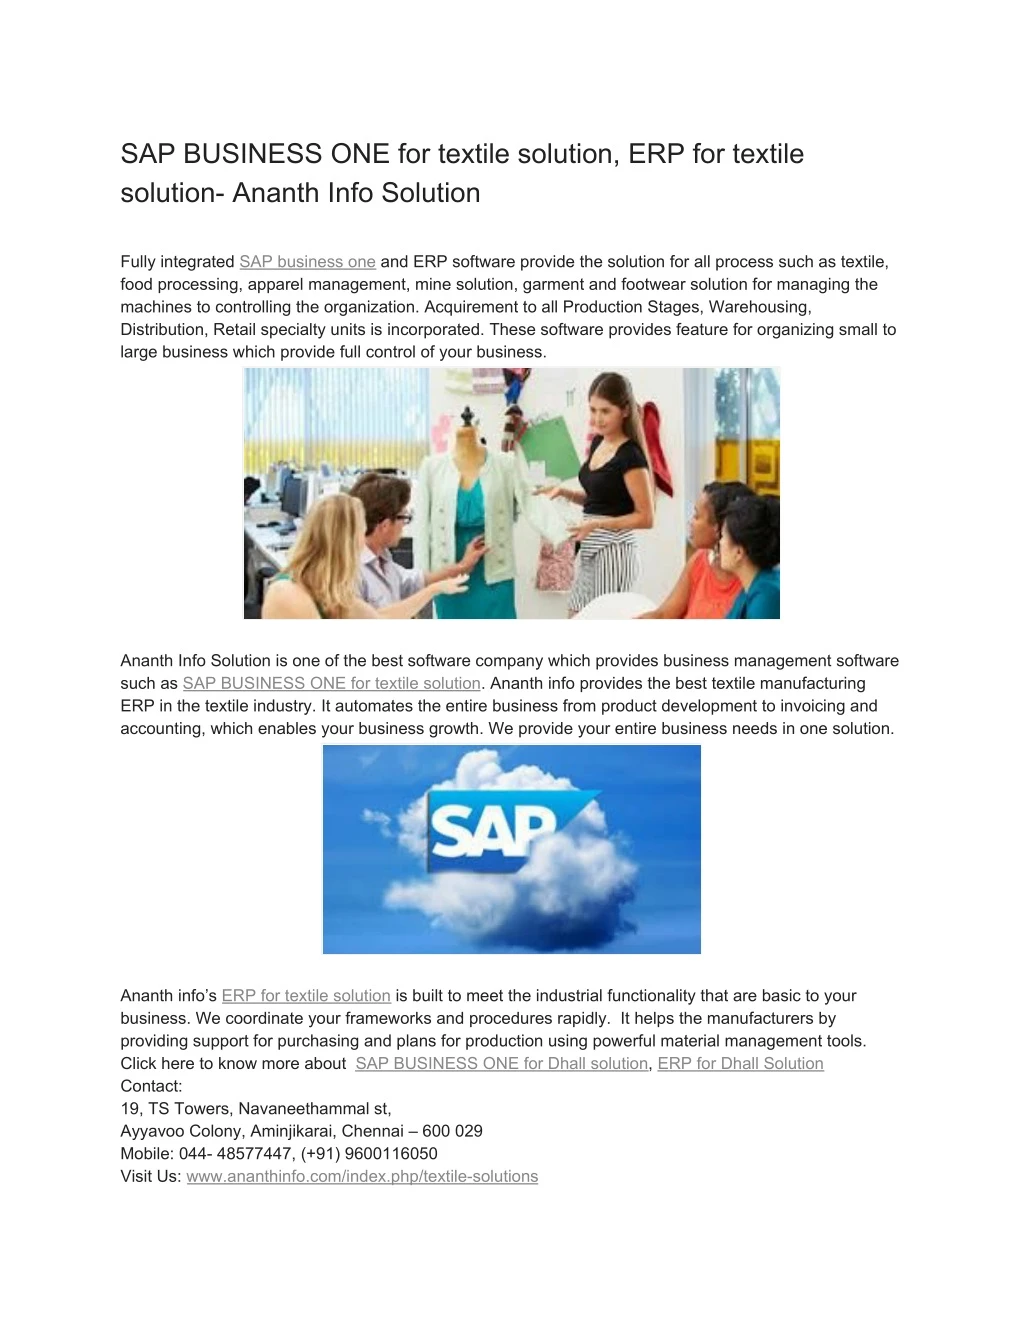 sap business one for textile solution